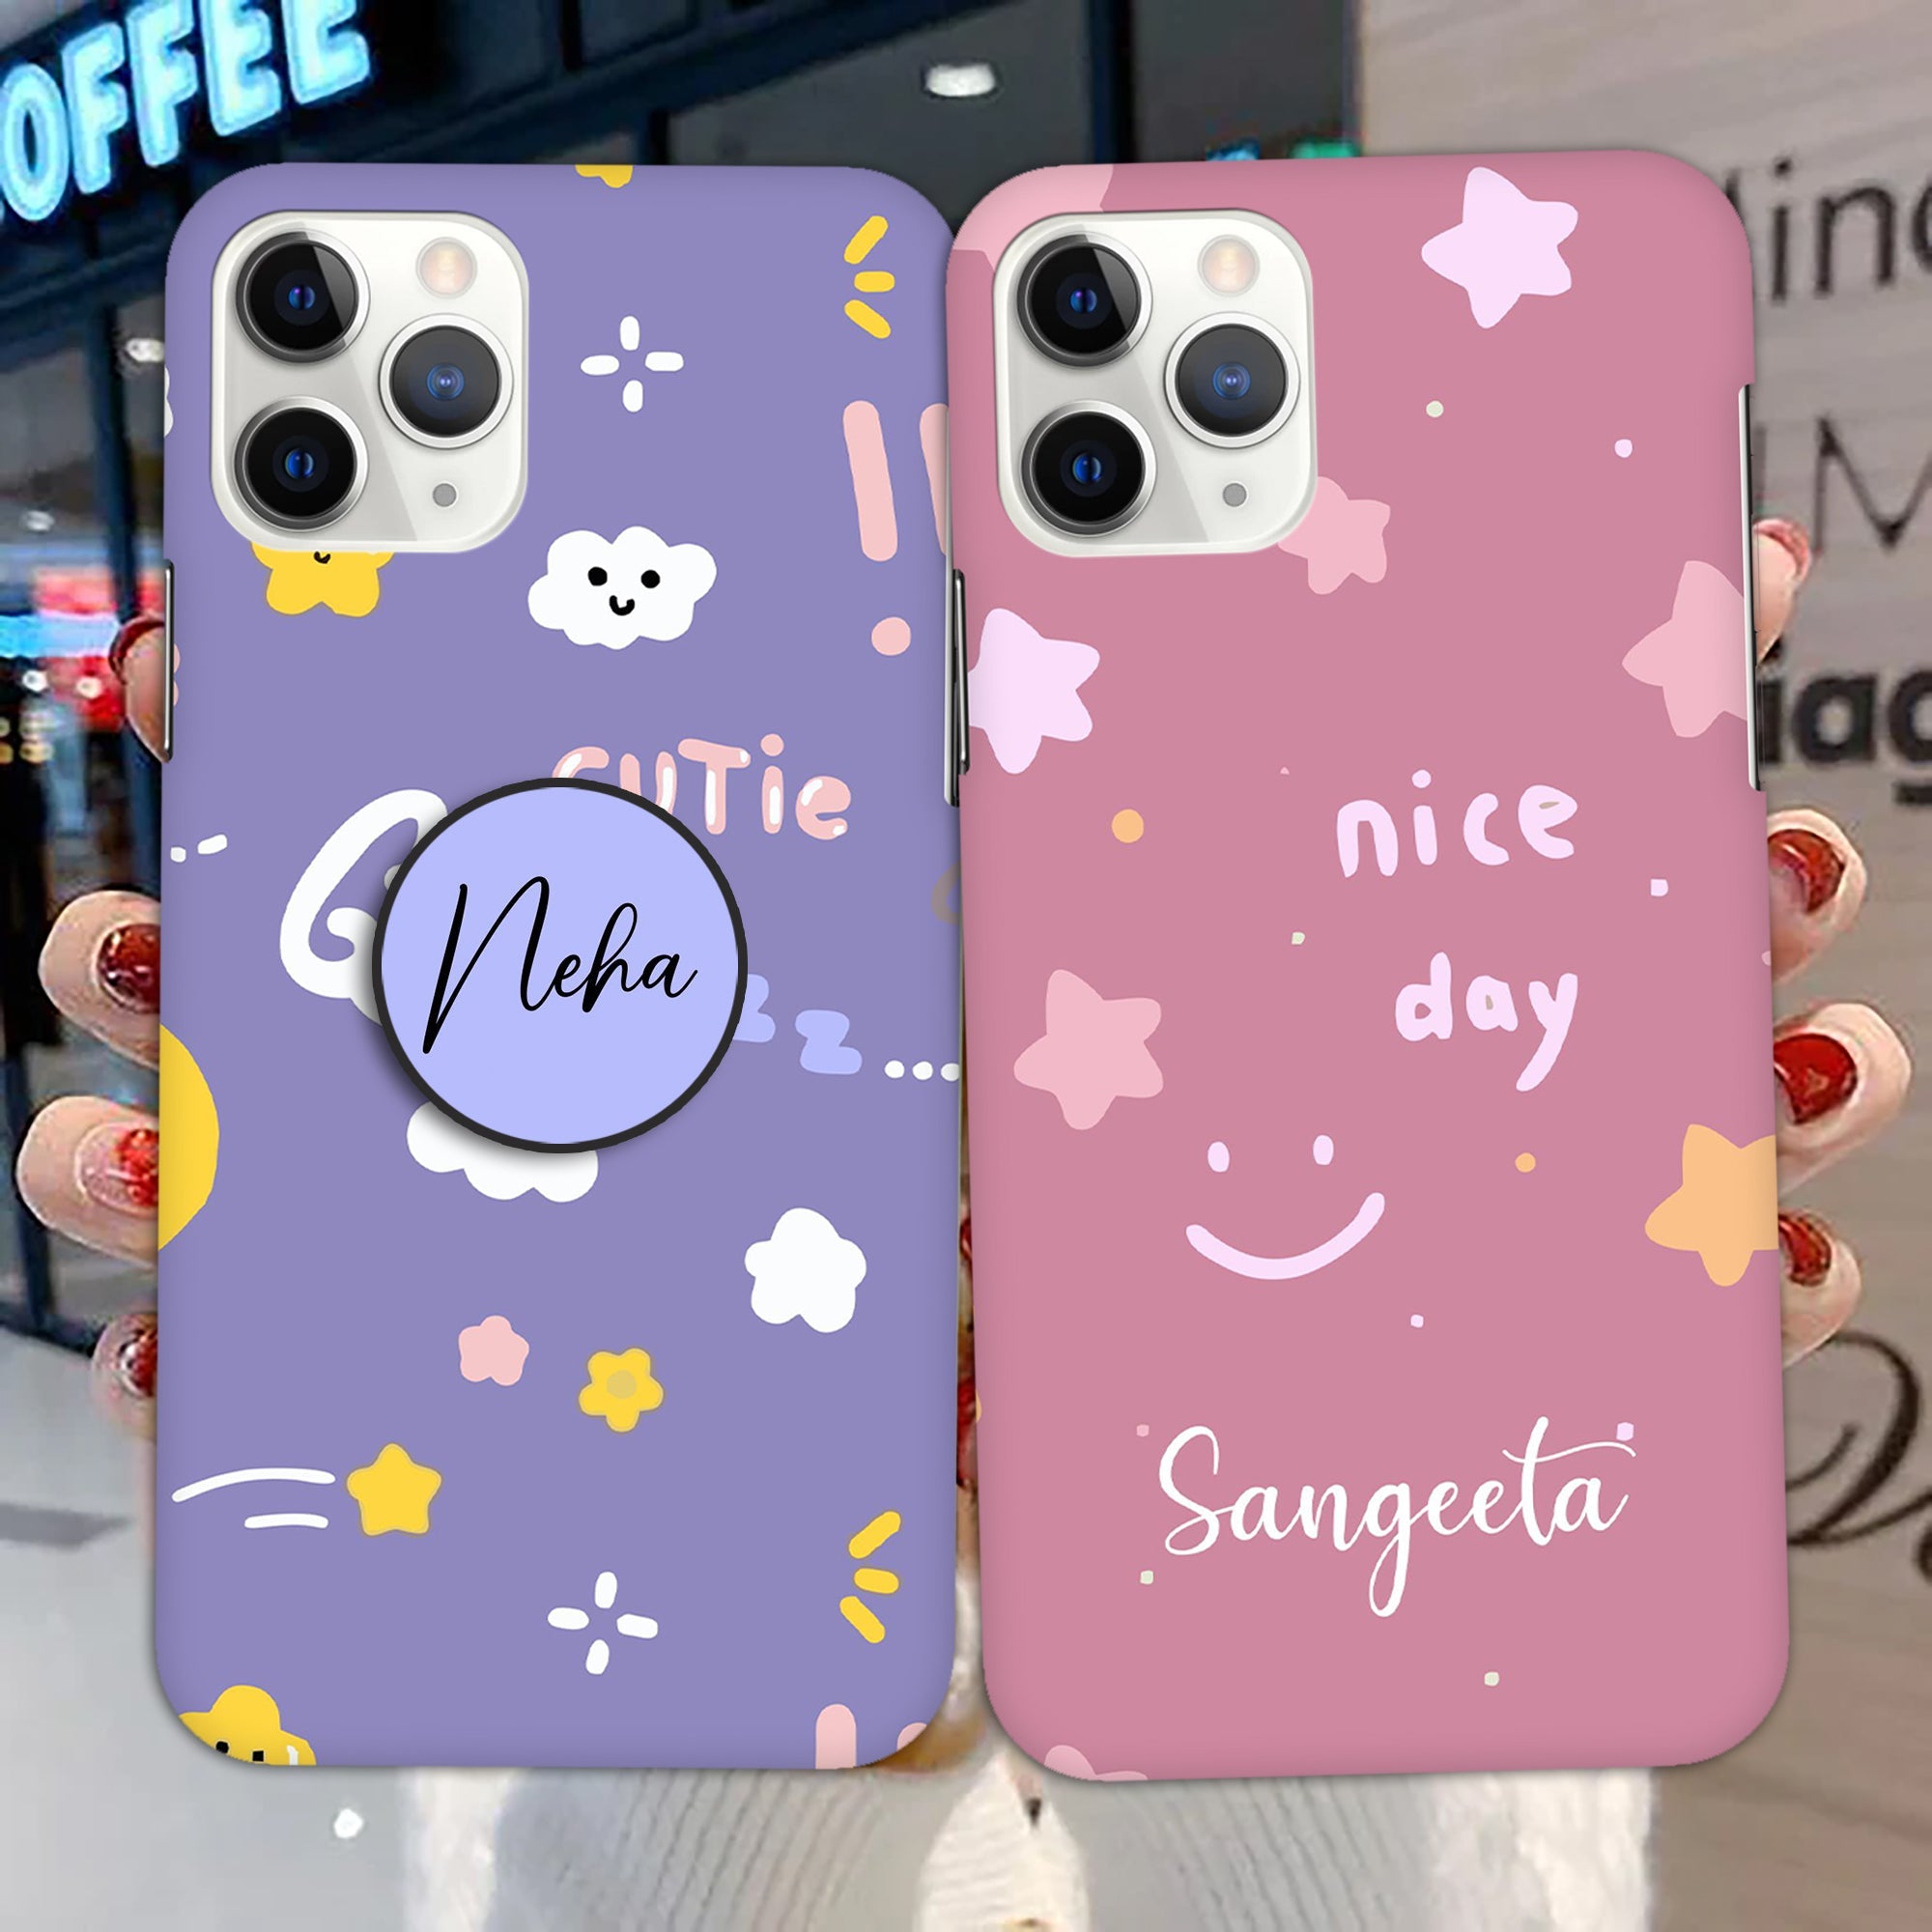 Download Phone Case Pastel Cute Drawings Picture | Wallpapers.com